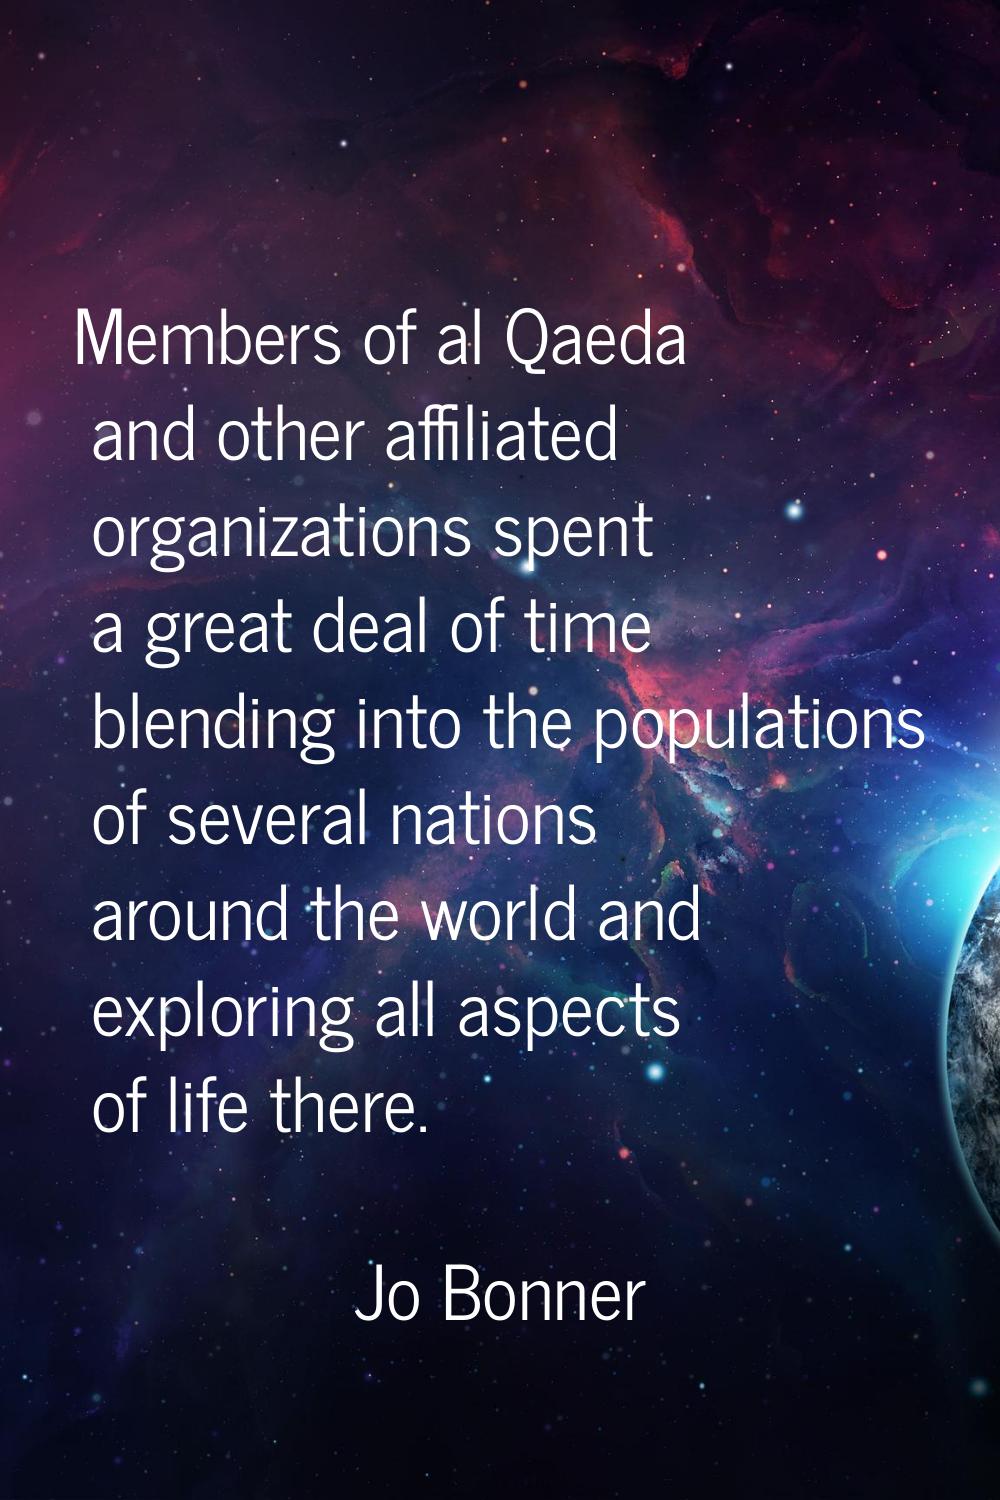 Members of al Qaeda and other affiliated organizations spent a great deal of time blending into the